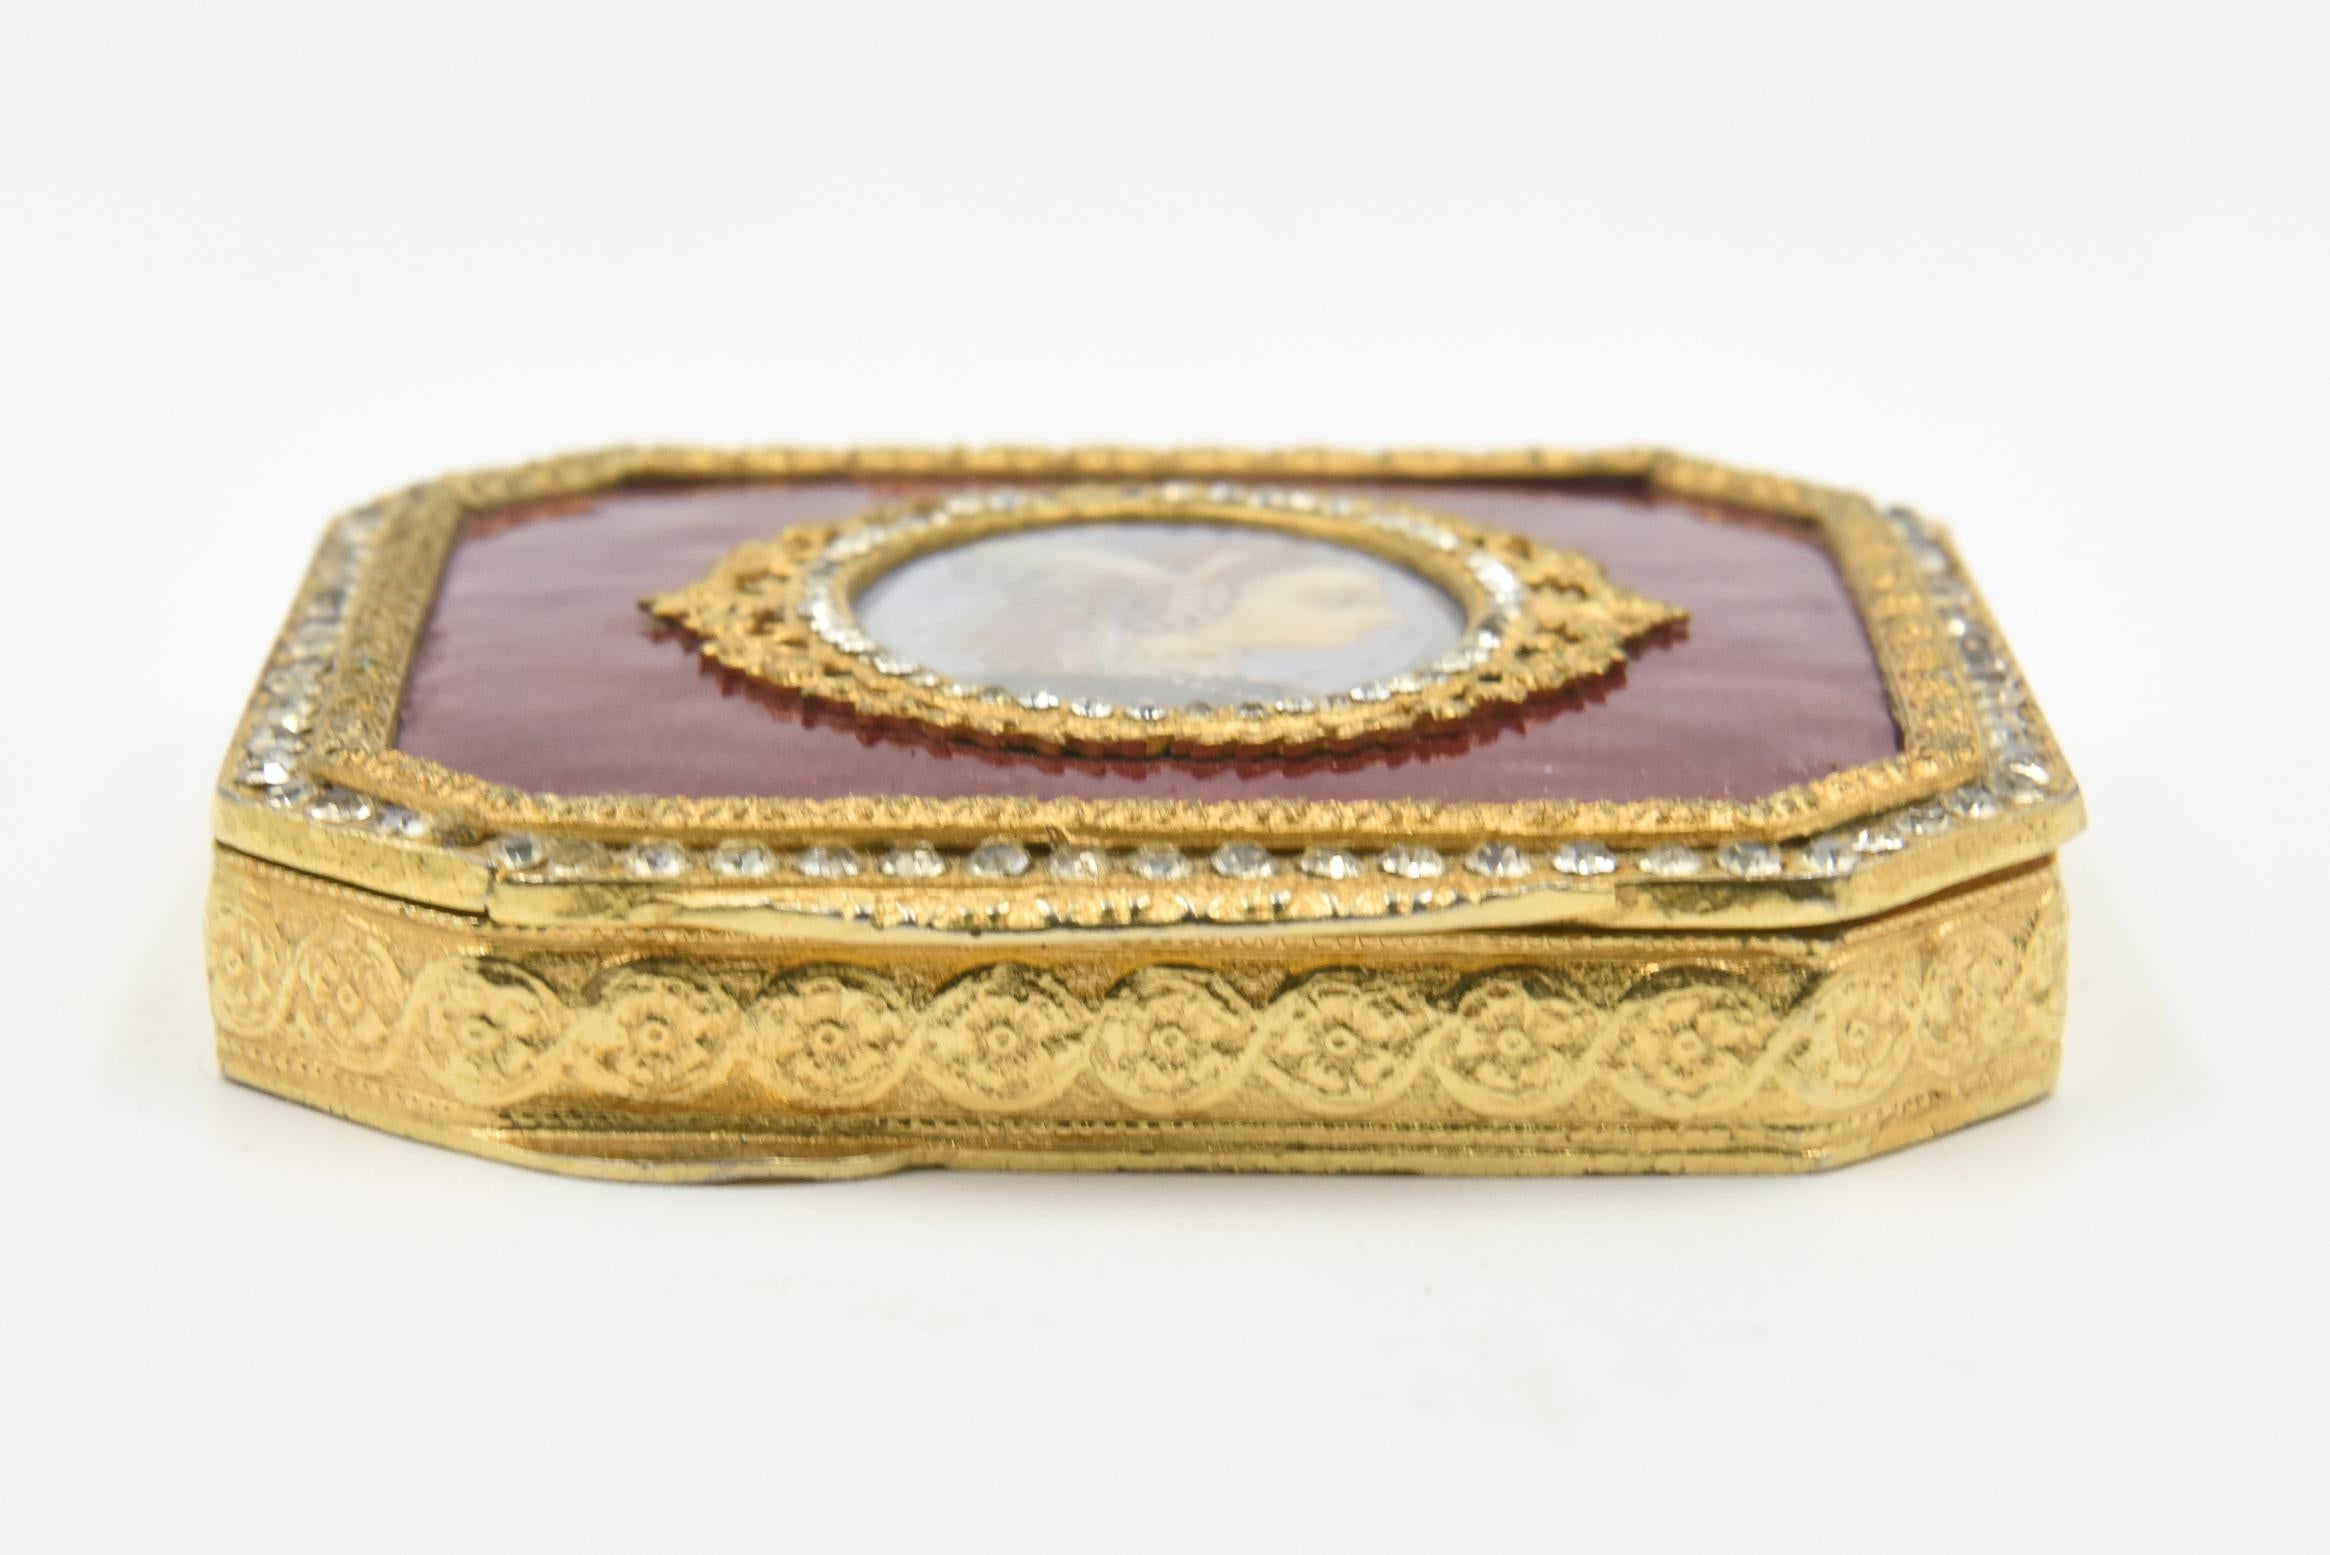 Red Guilloche Enamel Gilt Portrait of Period Lady Compact Powder or Pill Box For Sale 2